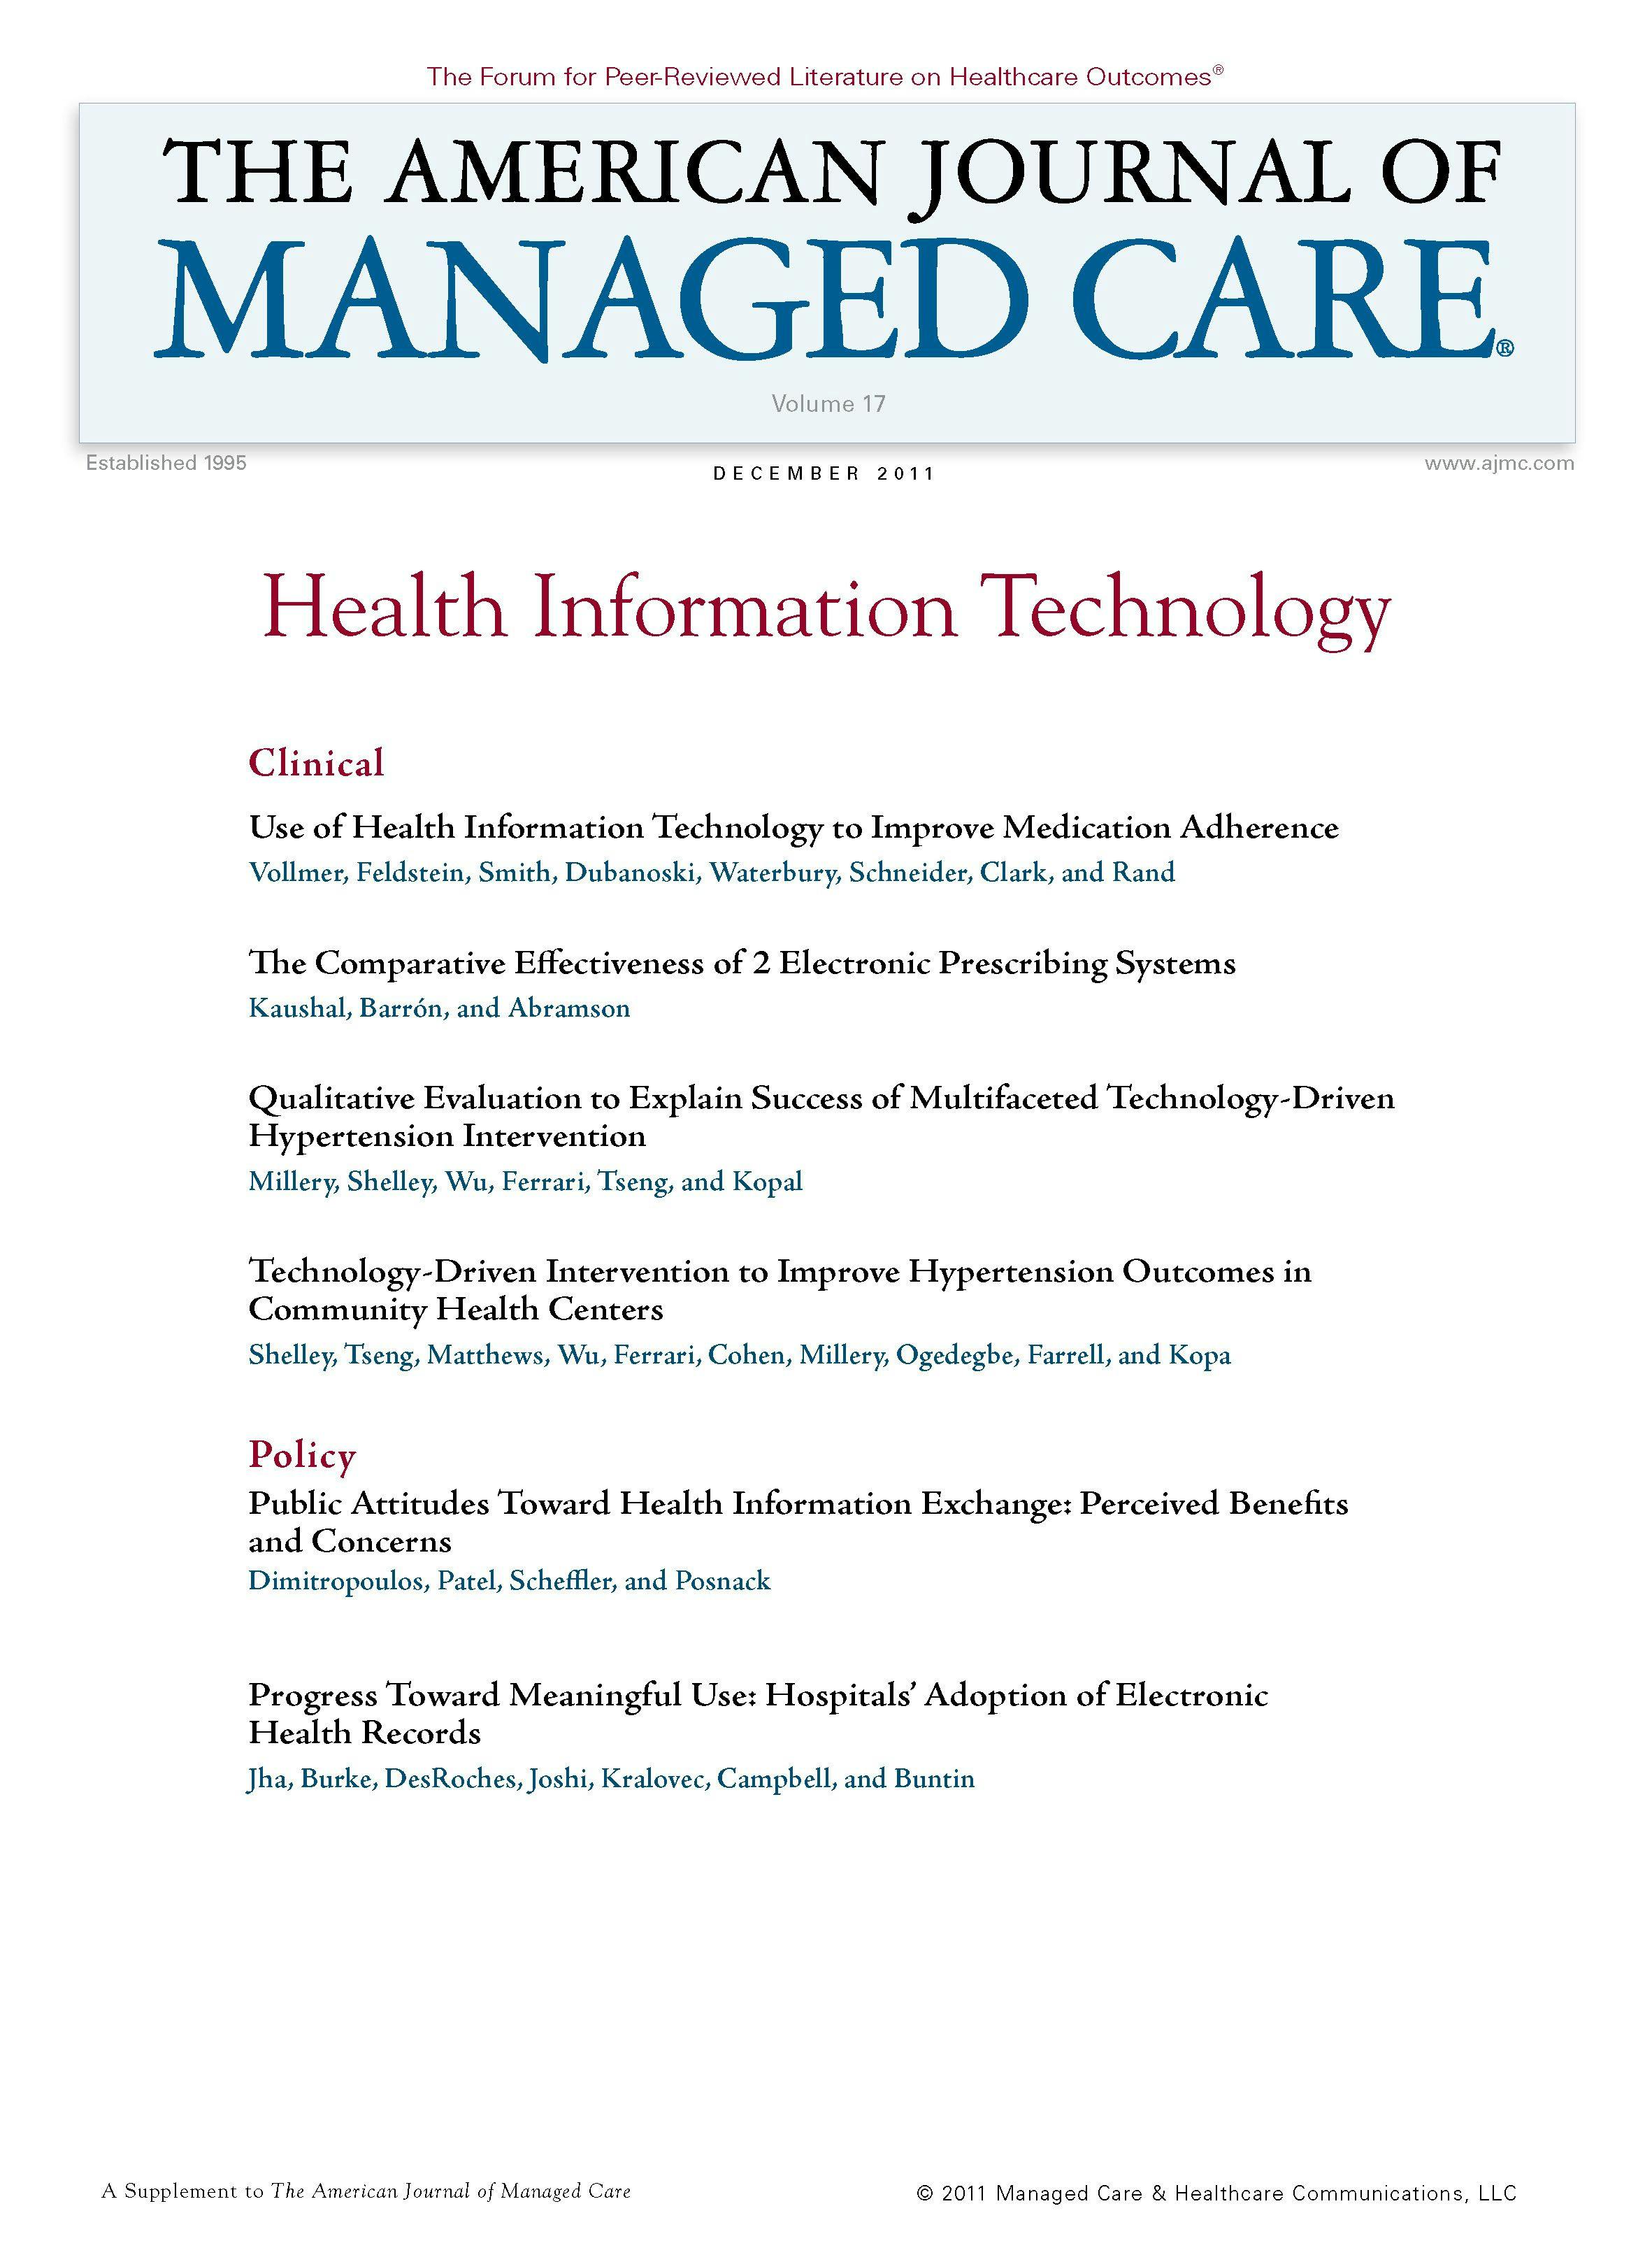 Special Issue: Health Information Technology - Guest Editors: Michael F. Furukawa, PhD; and Eric Poon, MD, MPH